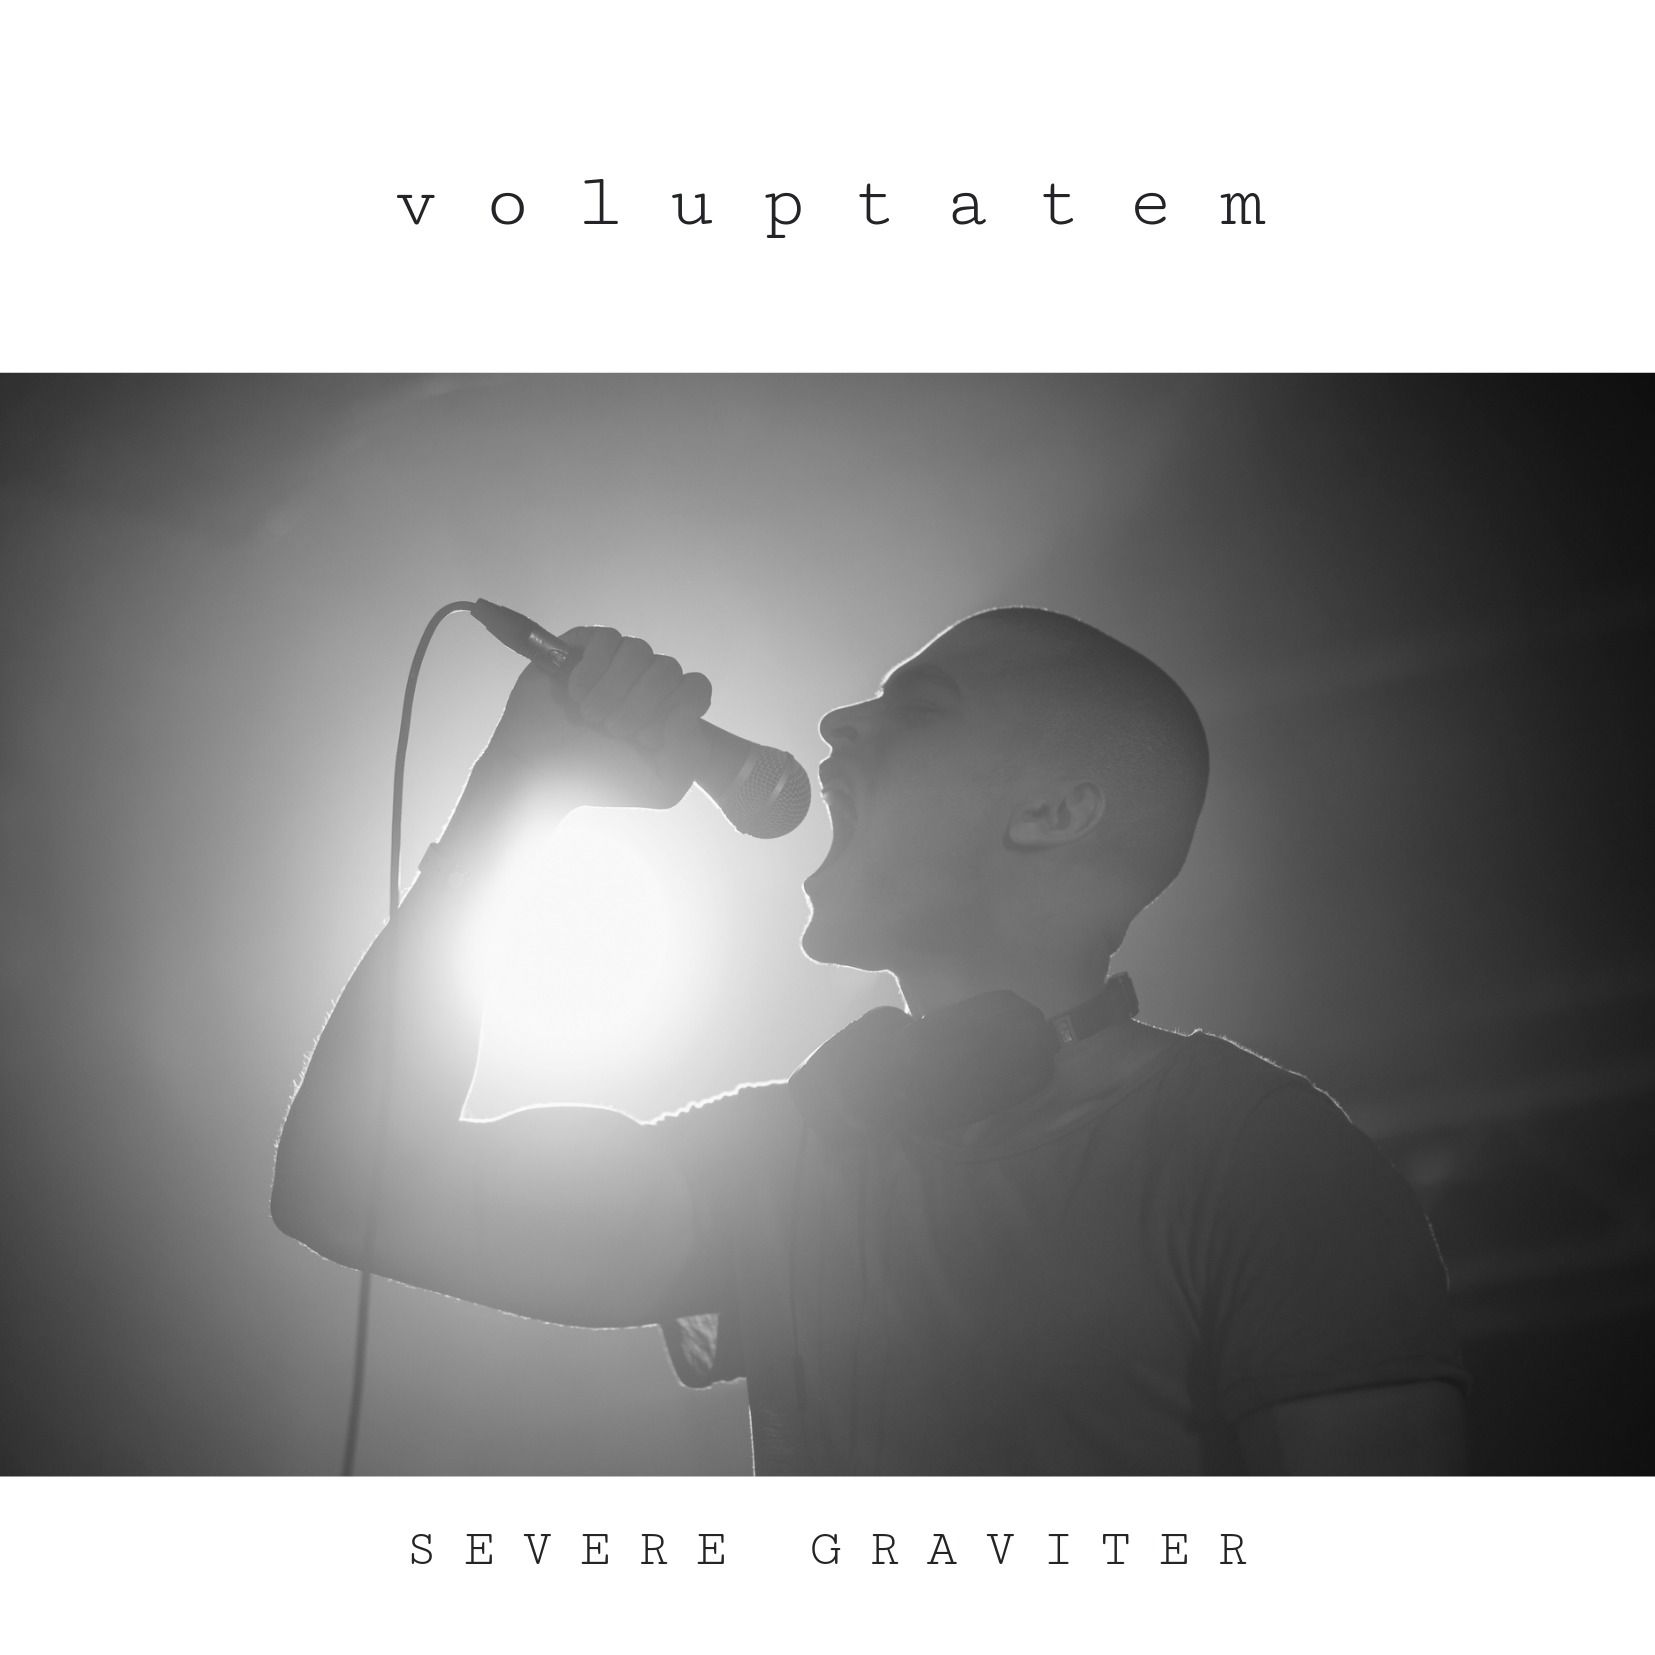 Black and white image of singer with microphone on stage - Screaming album cover design - Image